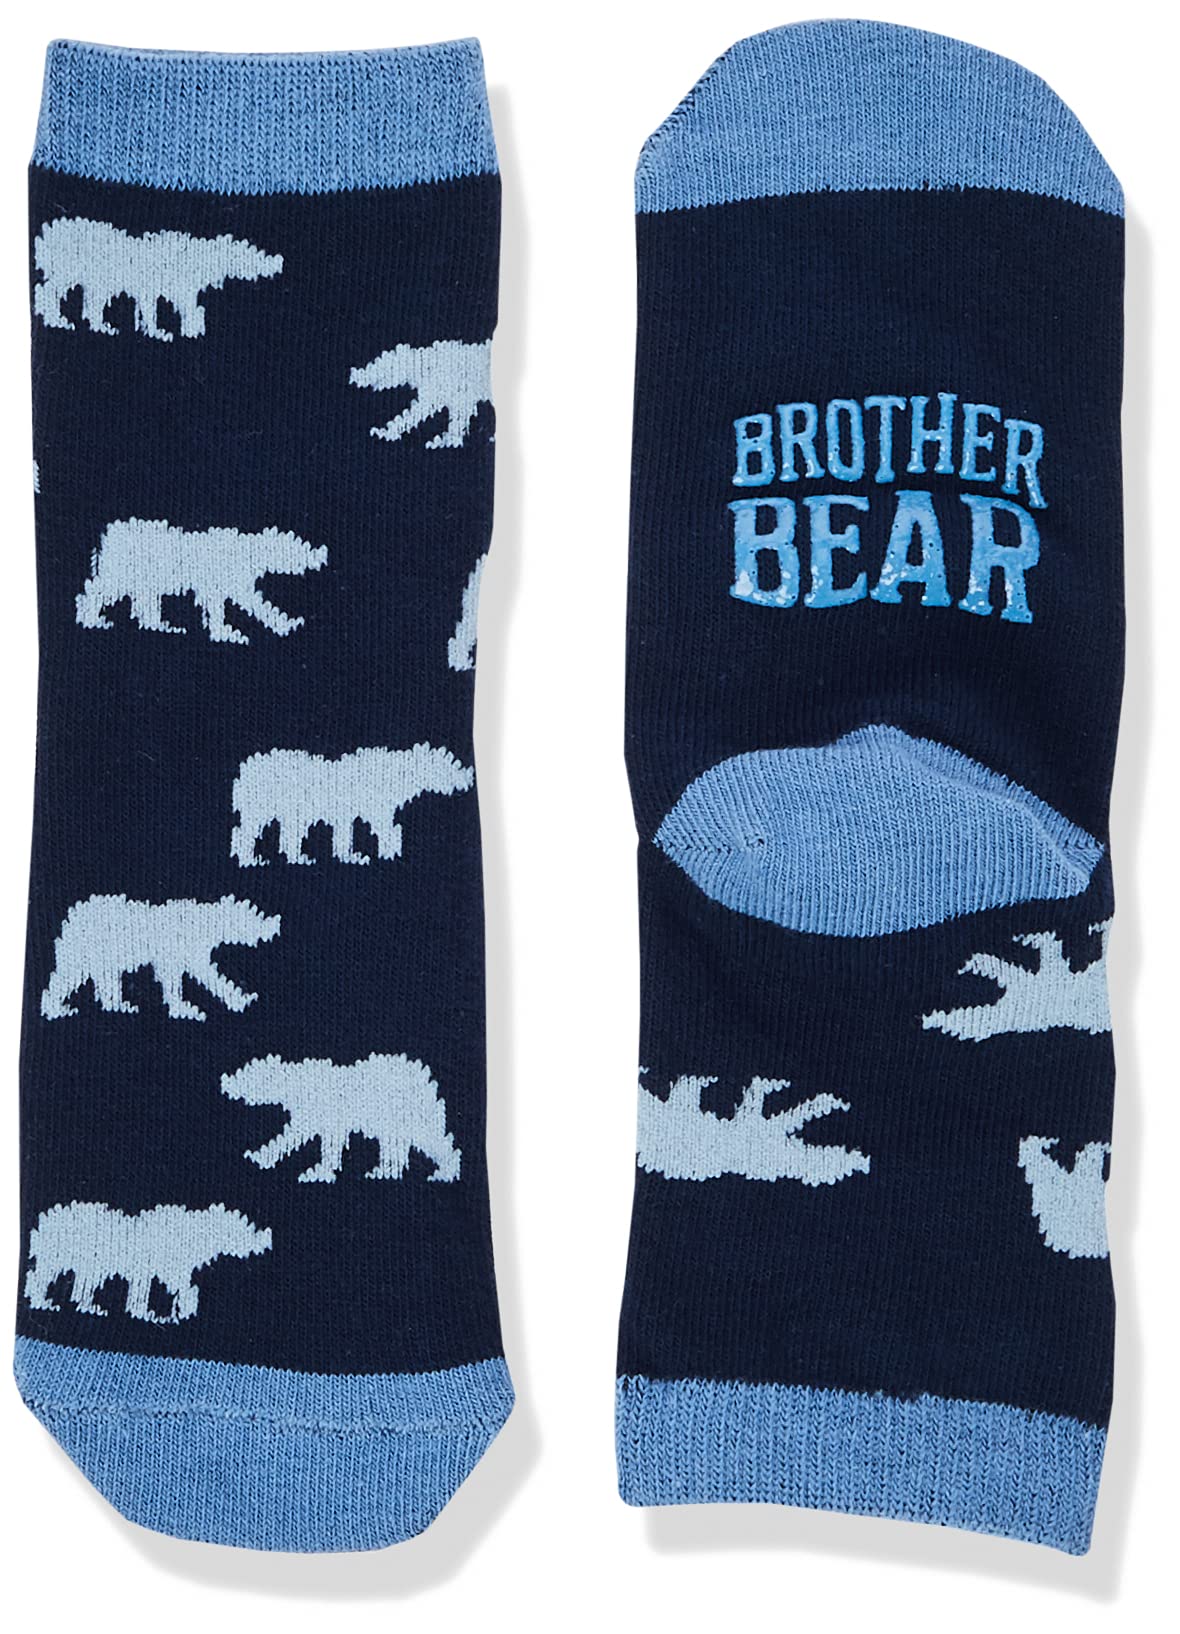 Little Blue House by Hatley Kids' Animal Crew Socks, Brother Bear, Large (4-7 Years Old)